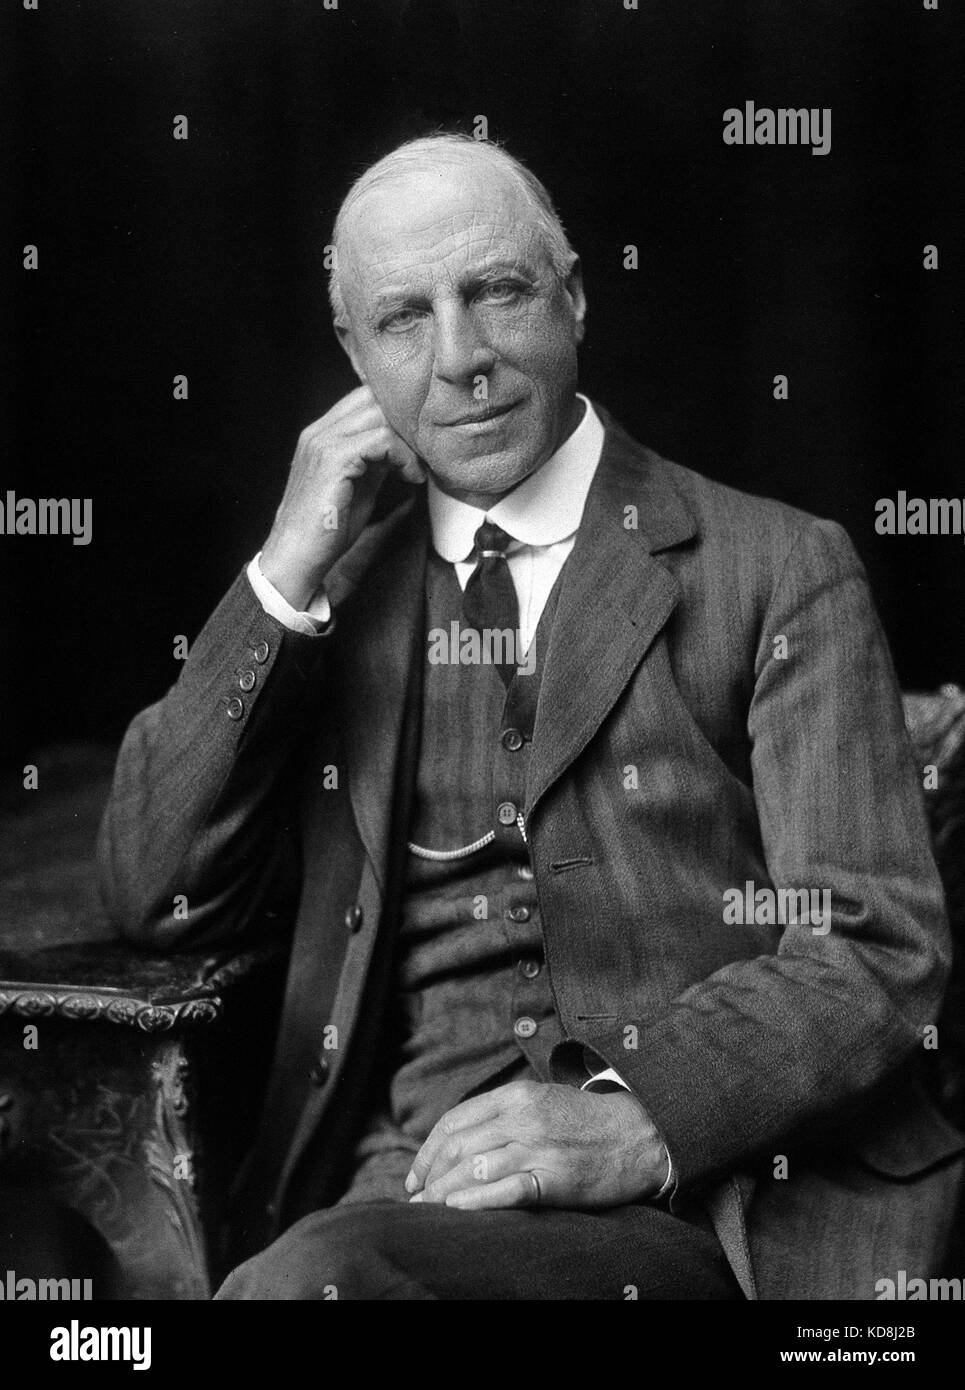 EDWARD SHARPER-SCHAFER (1850-1935) English physiologist who jointly discovered adrenaline with George Oliver Stock Photo